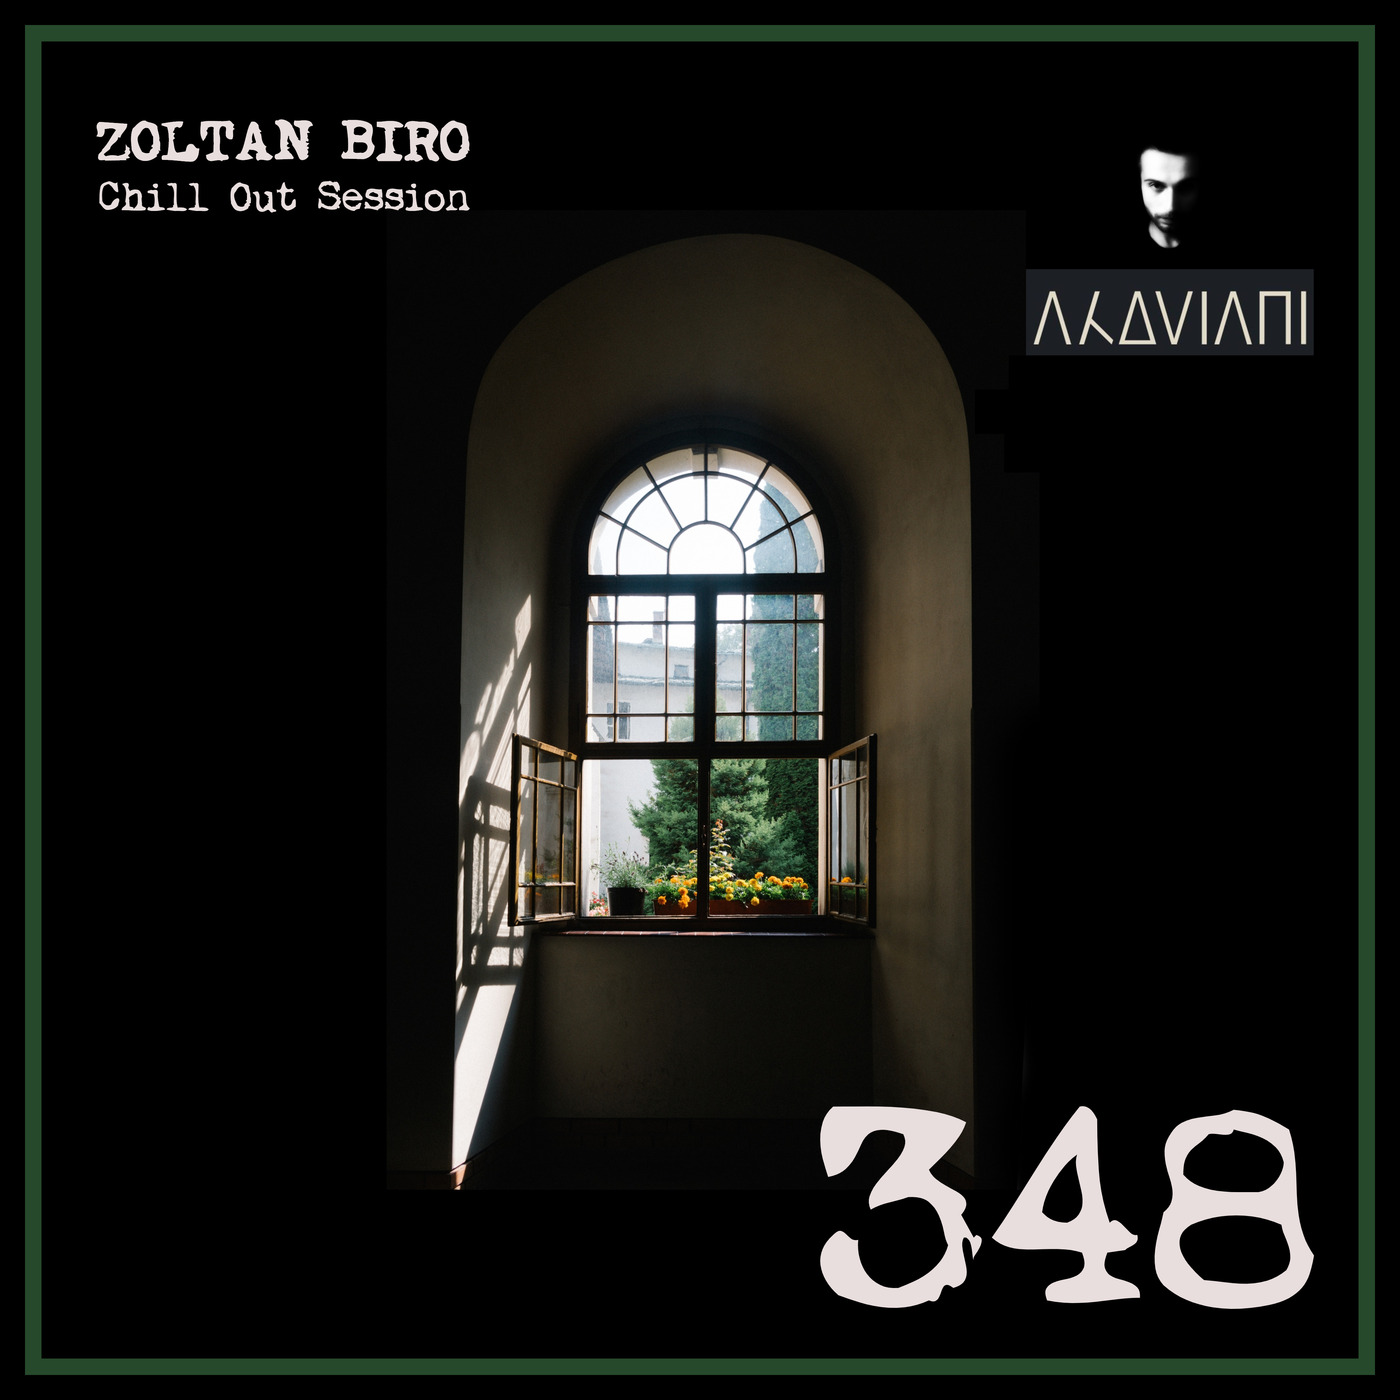 Zoltan Biro - Chill Out Session 348 [including: Akoviani Special Mix]